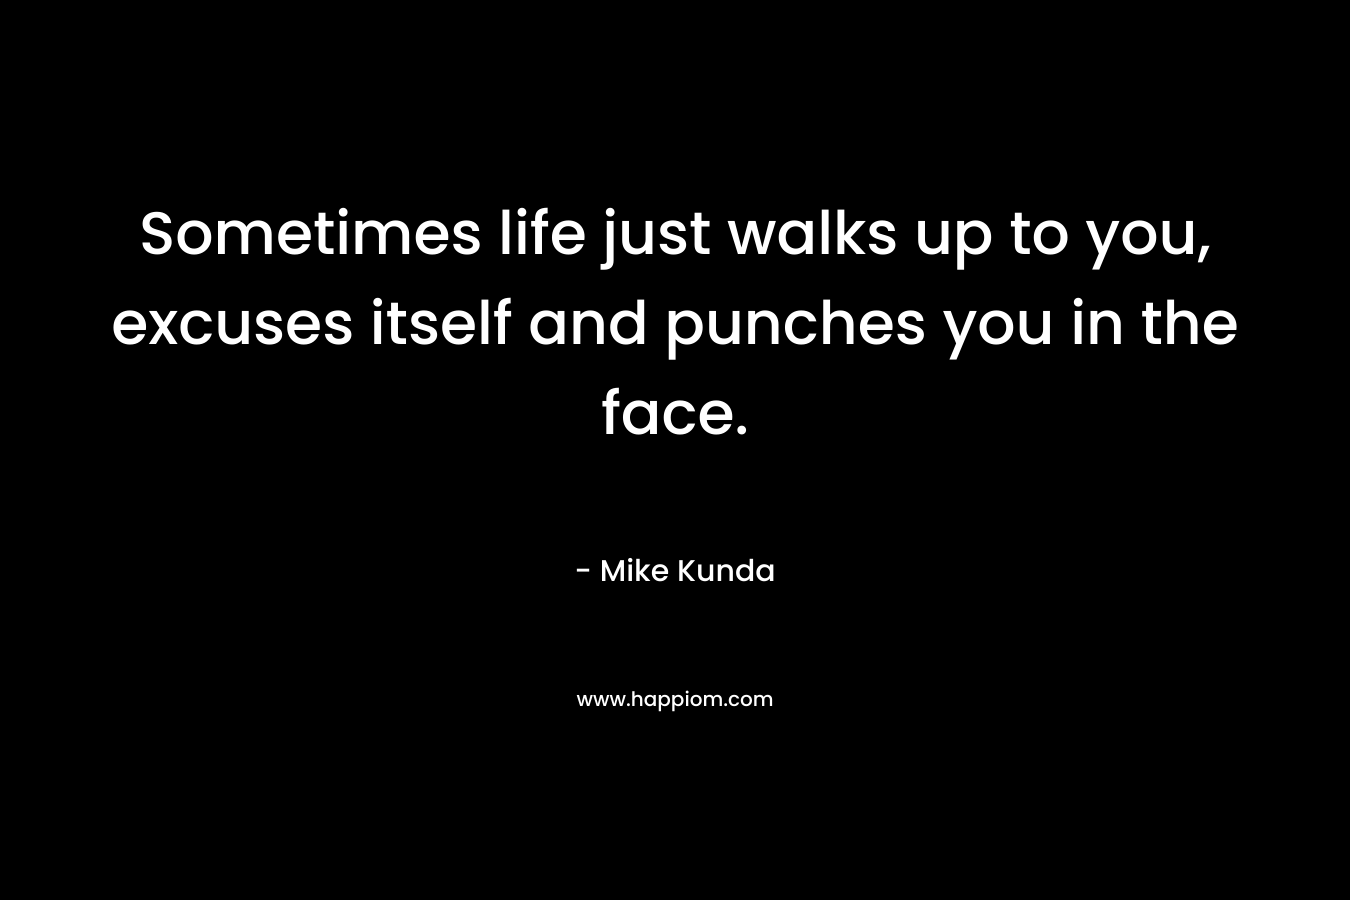 Sometimes life just walks up to you, excuses itself and punches you in the face.